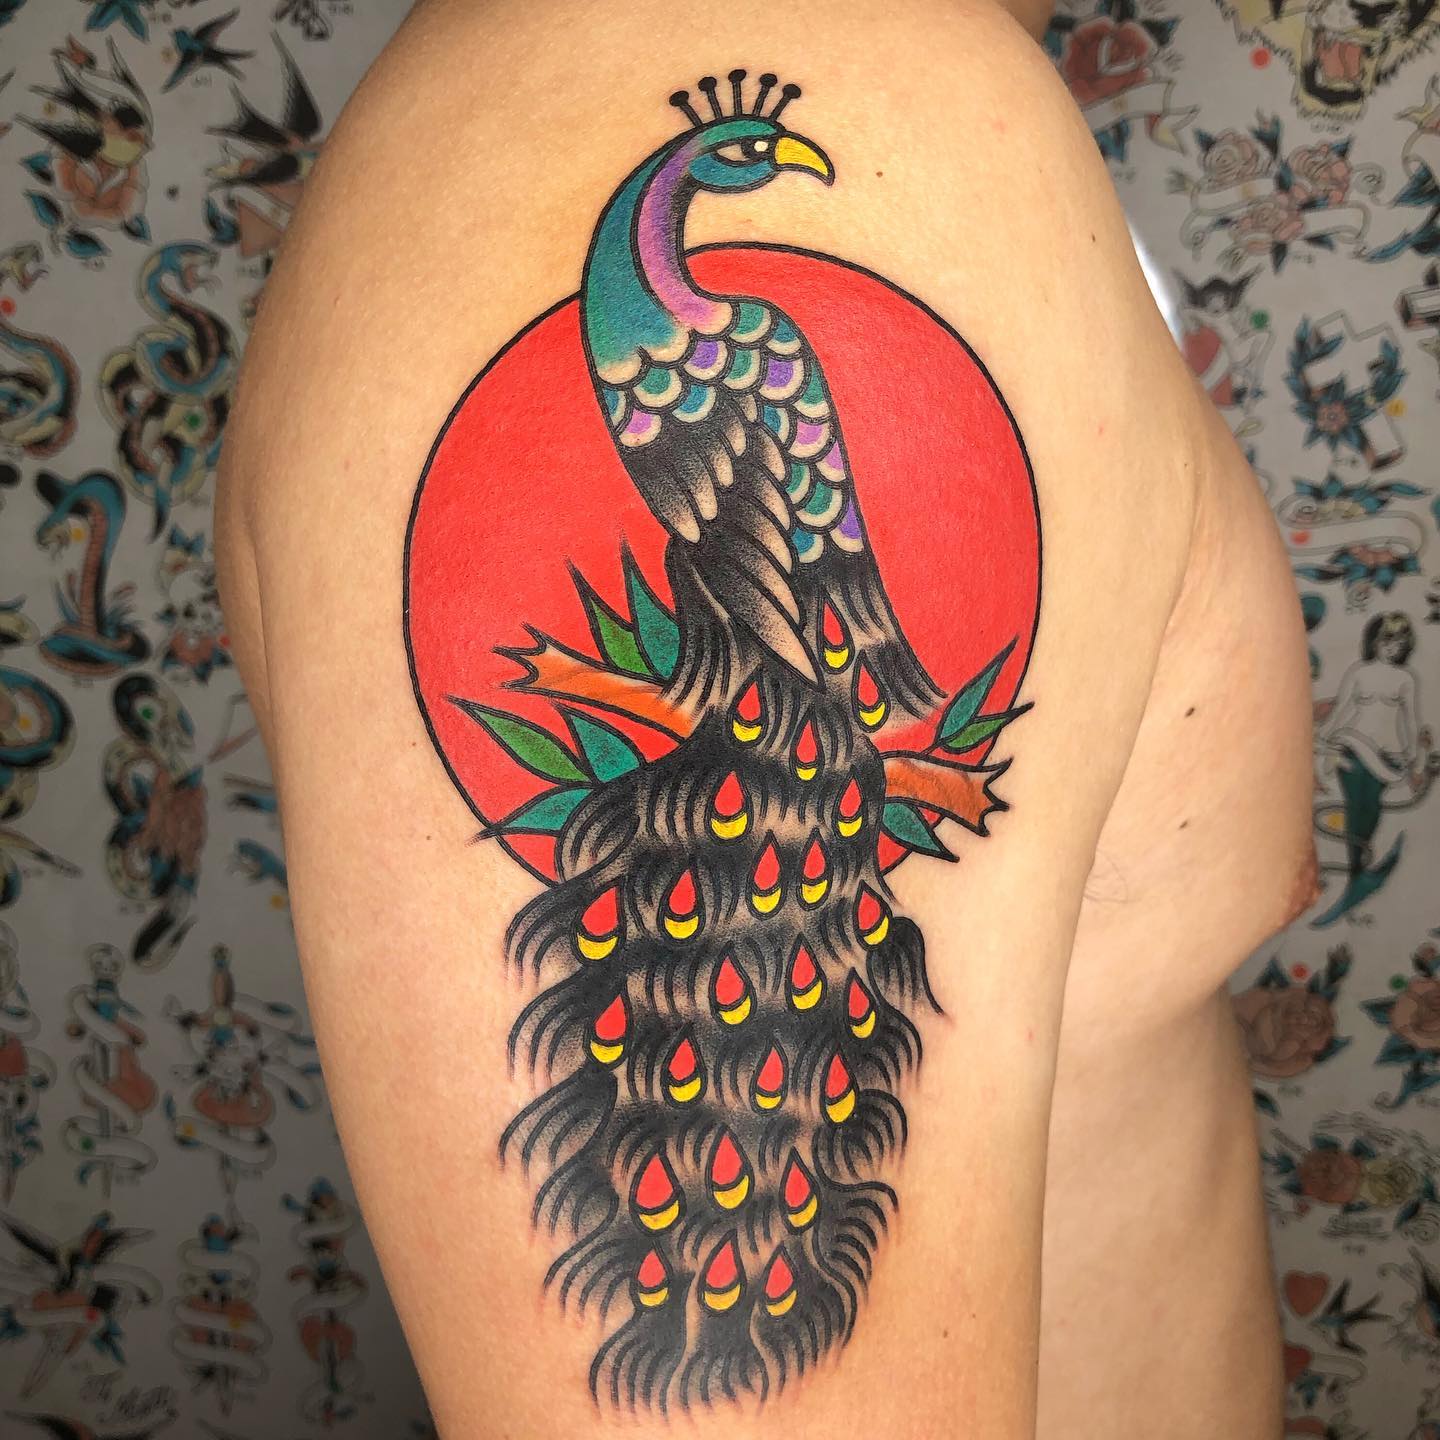 Peacock tattoo on upper arm by